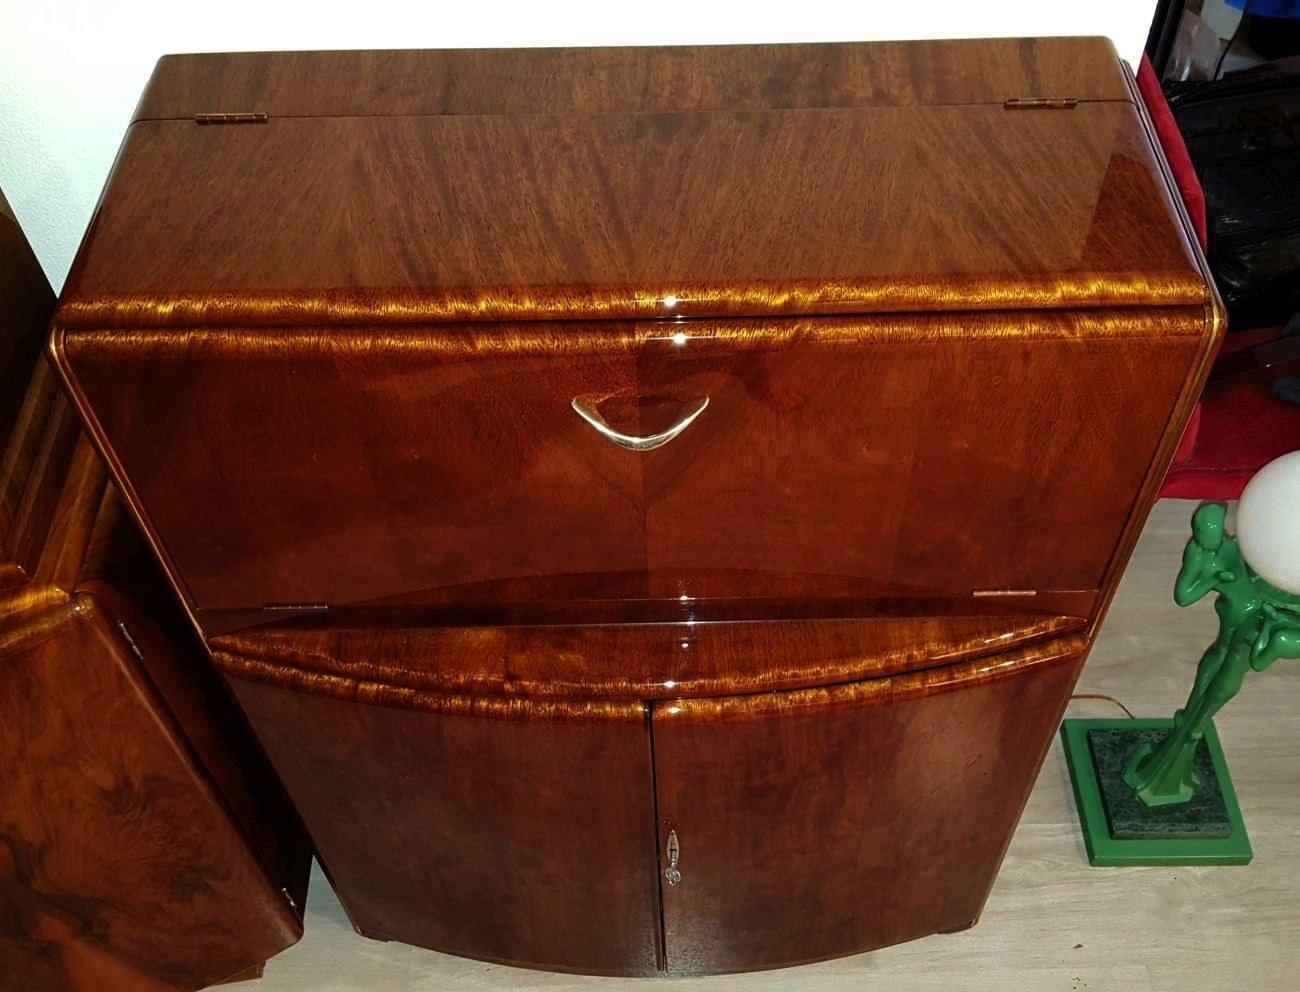 This vintage Art Deco cabinet features a bowfront design that provides a gently curving contour that is visually and stylistically pleasing. Made of a bookmatched burl walnut on the cabinet's exterior with the interior veneered in a ribbon figured